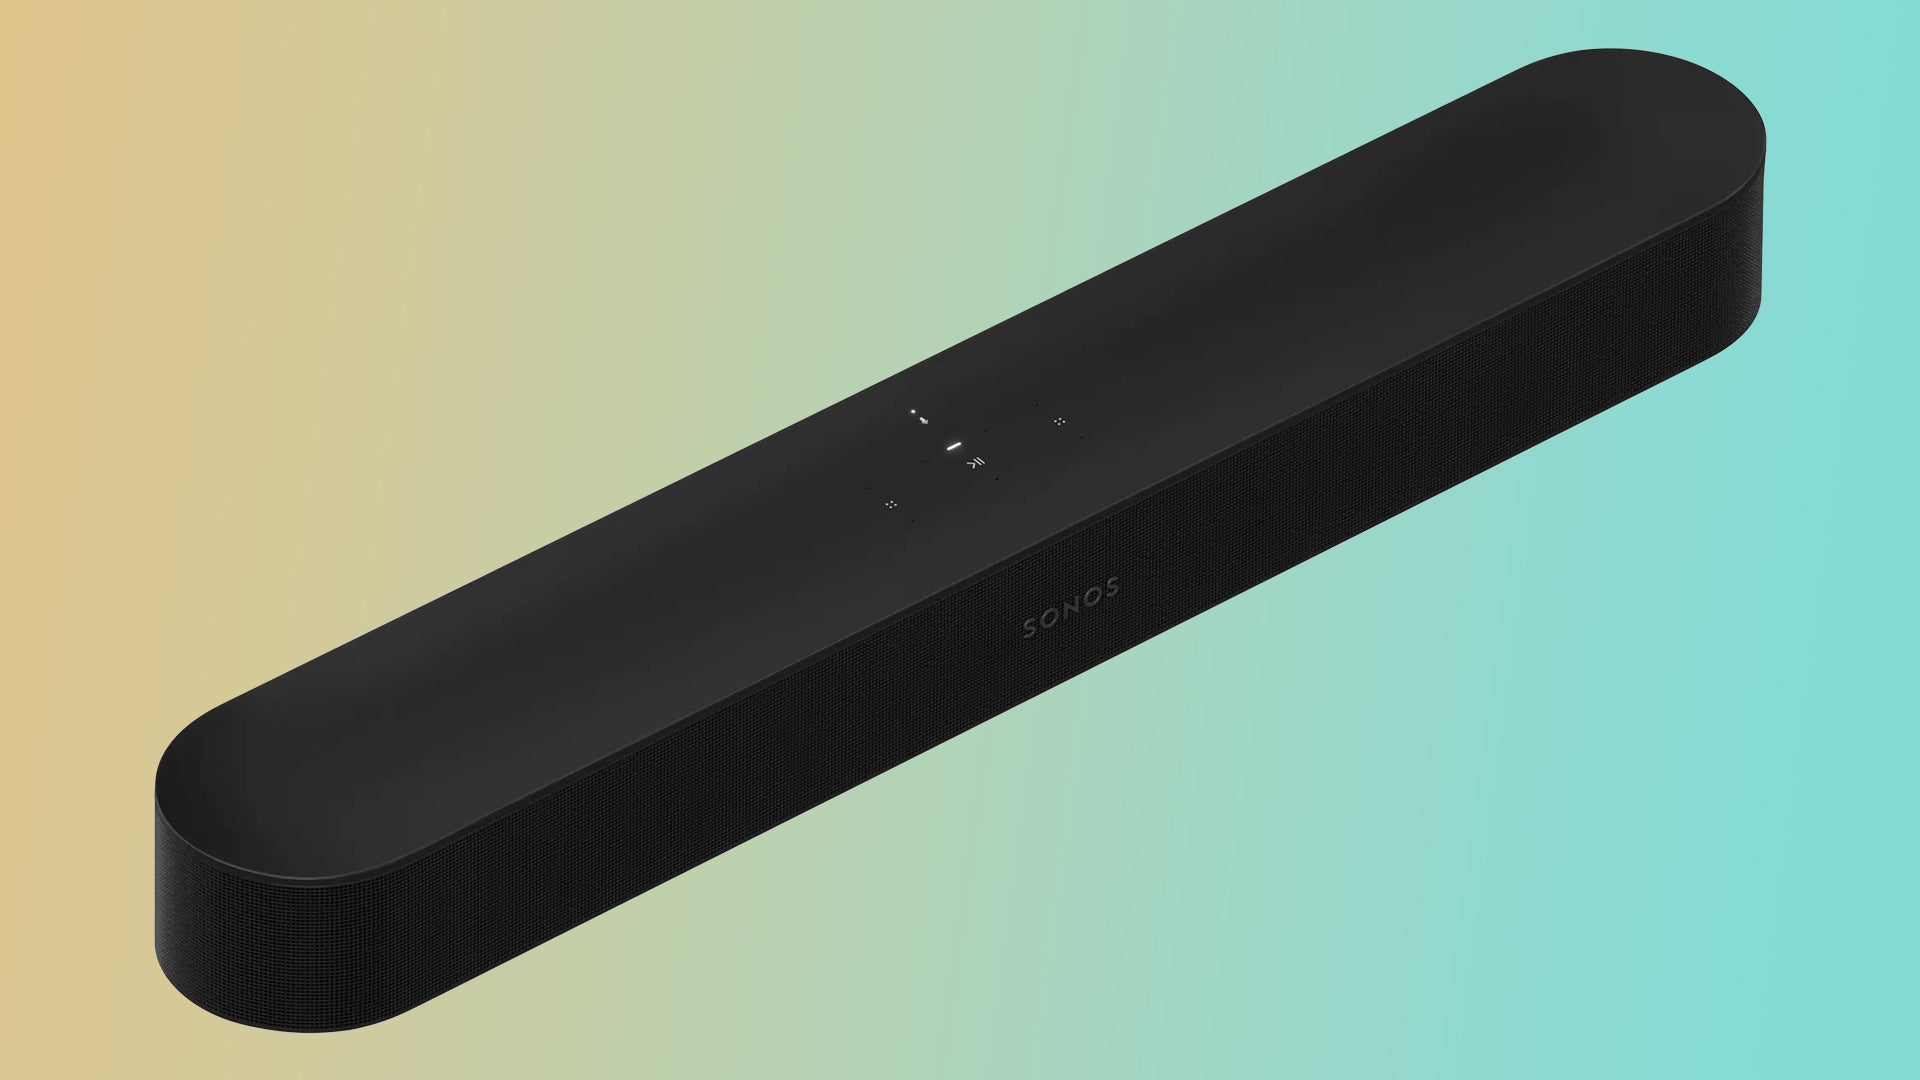 The Sonos Beam Gen 2 is down to an amazing price with this eBay 